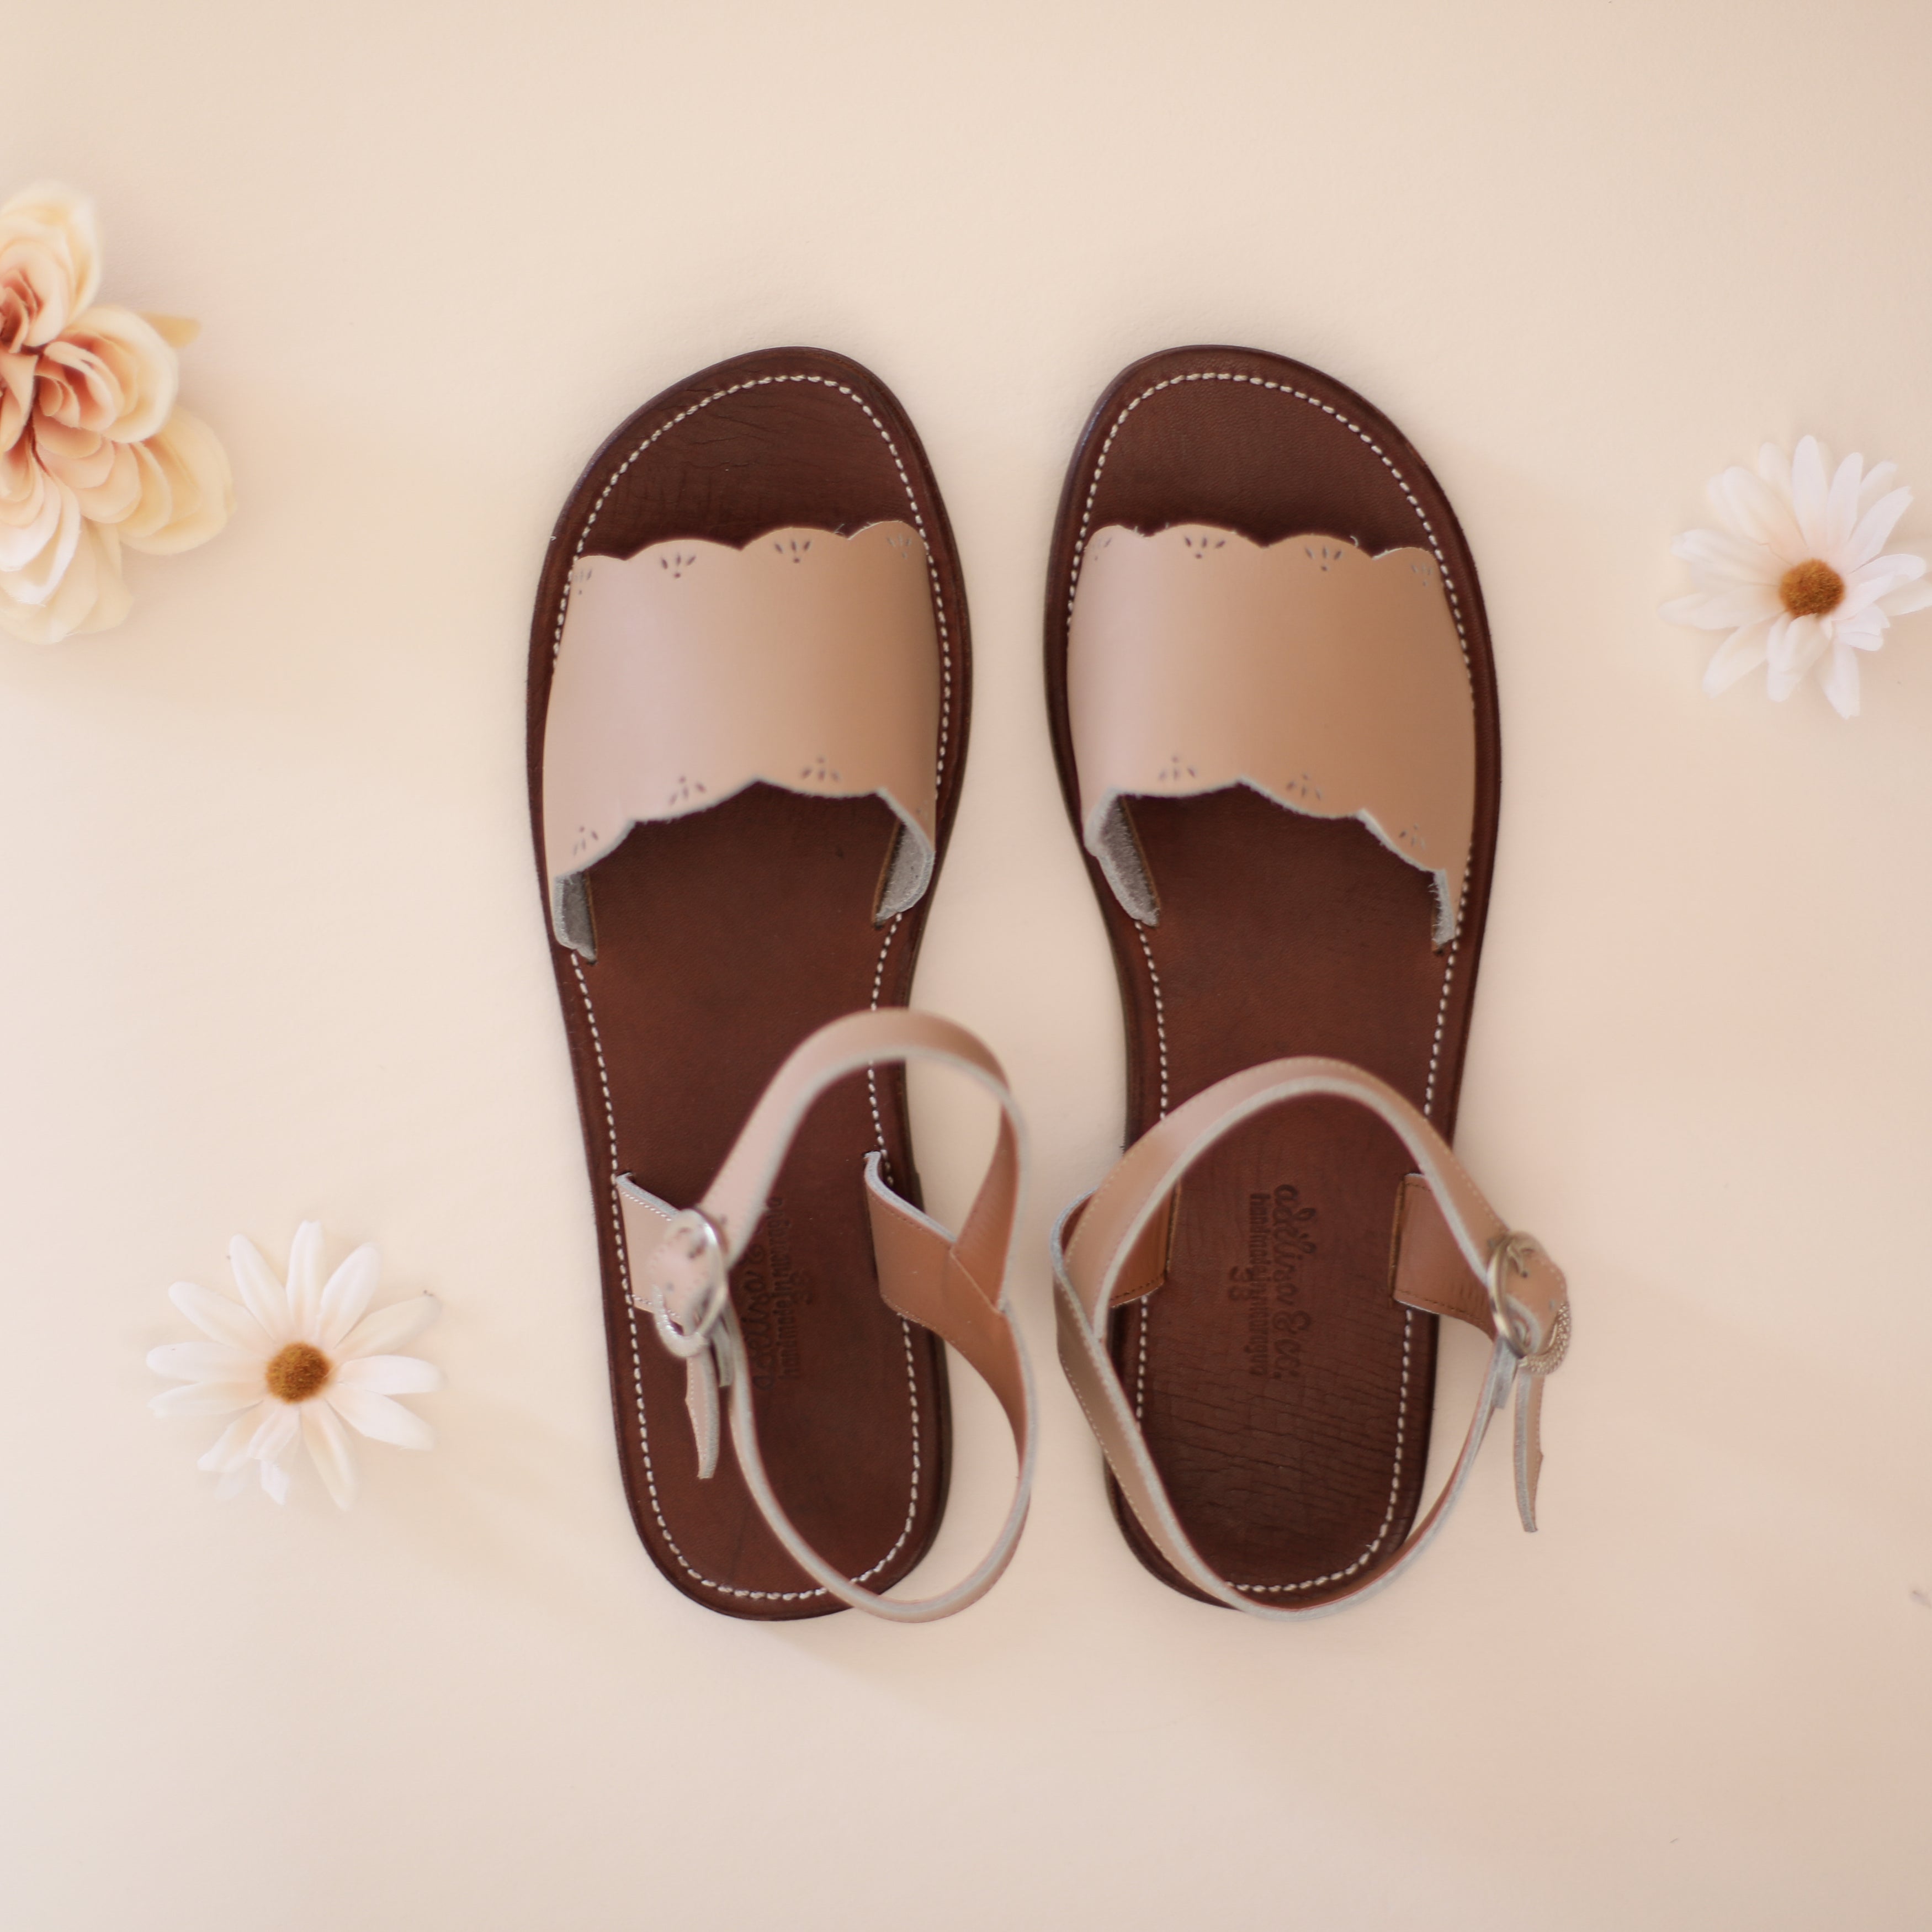 Adelisa &amp; Co nude blush pink leather sandals for women with scallop and floral detailing.